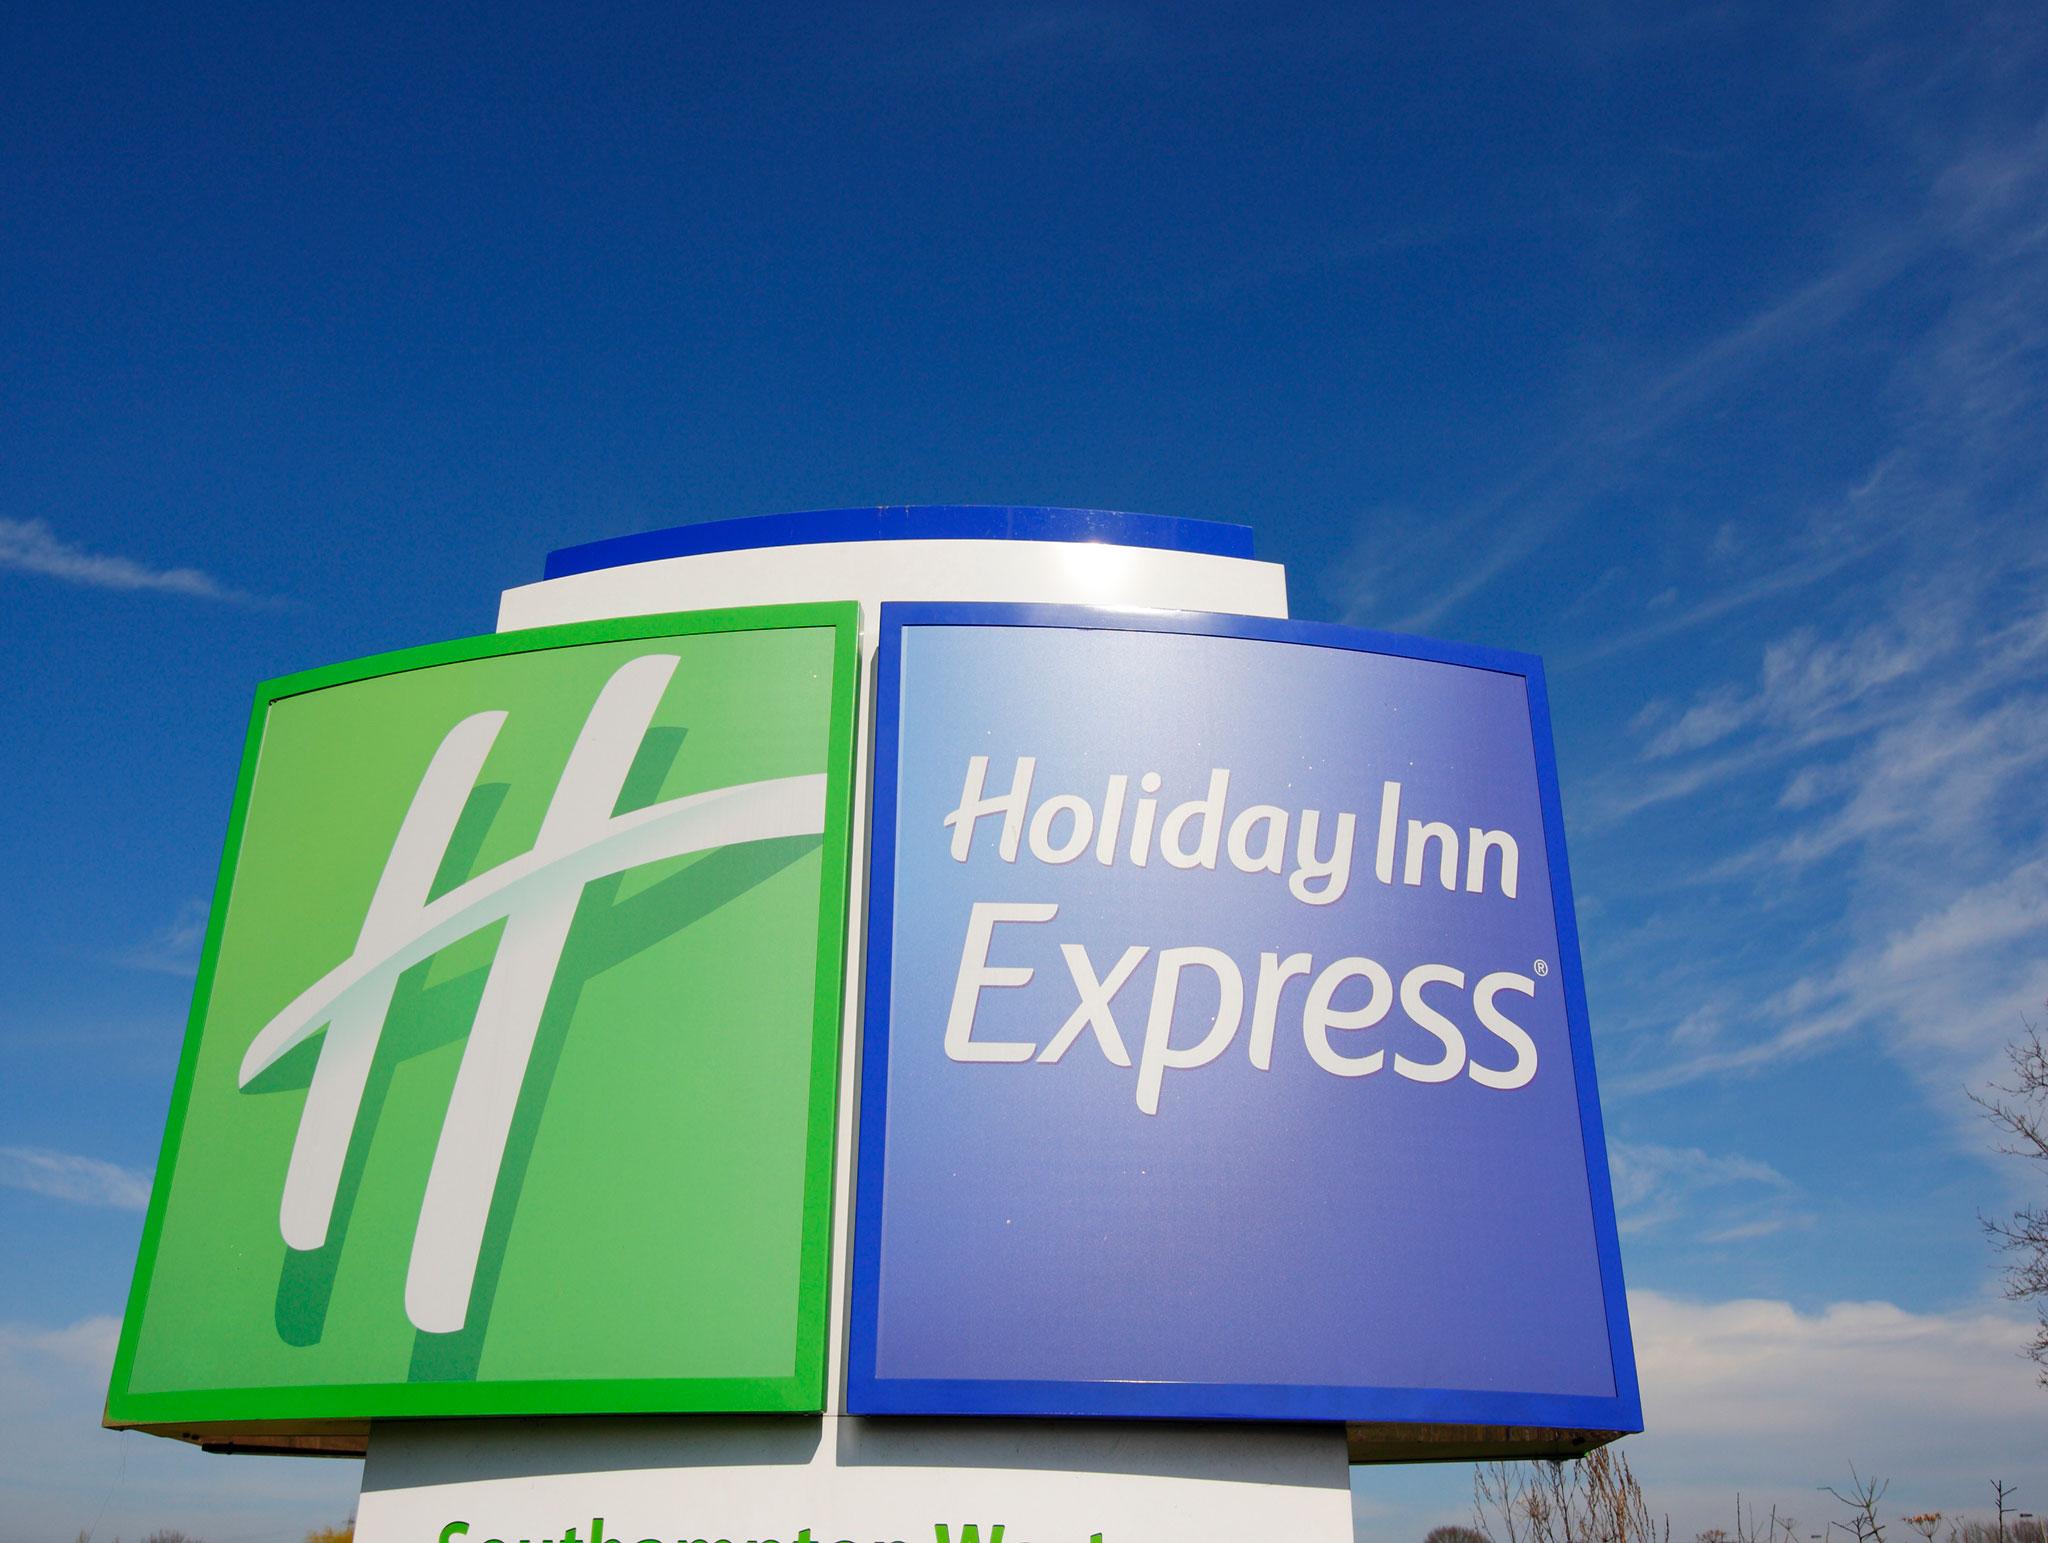 Intercontinental Hotels owns Holiday Inn, among other brands